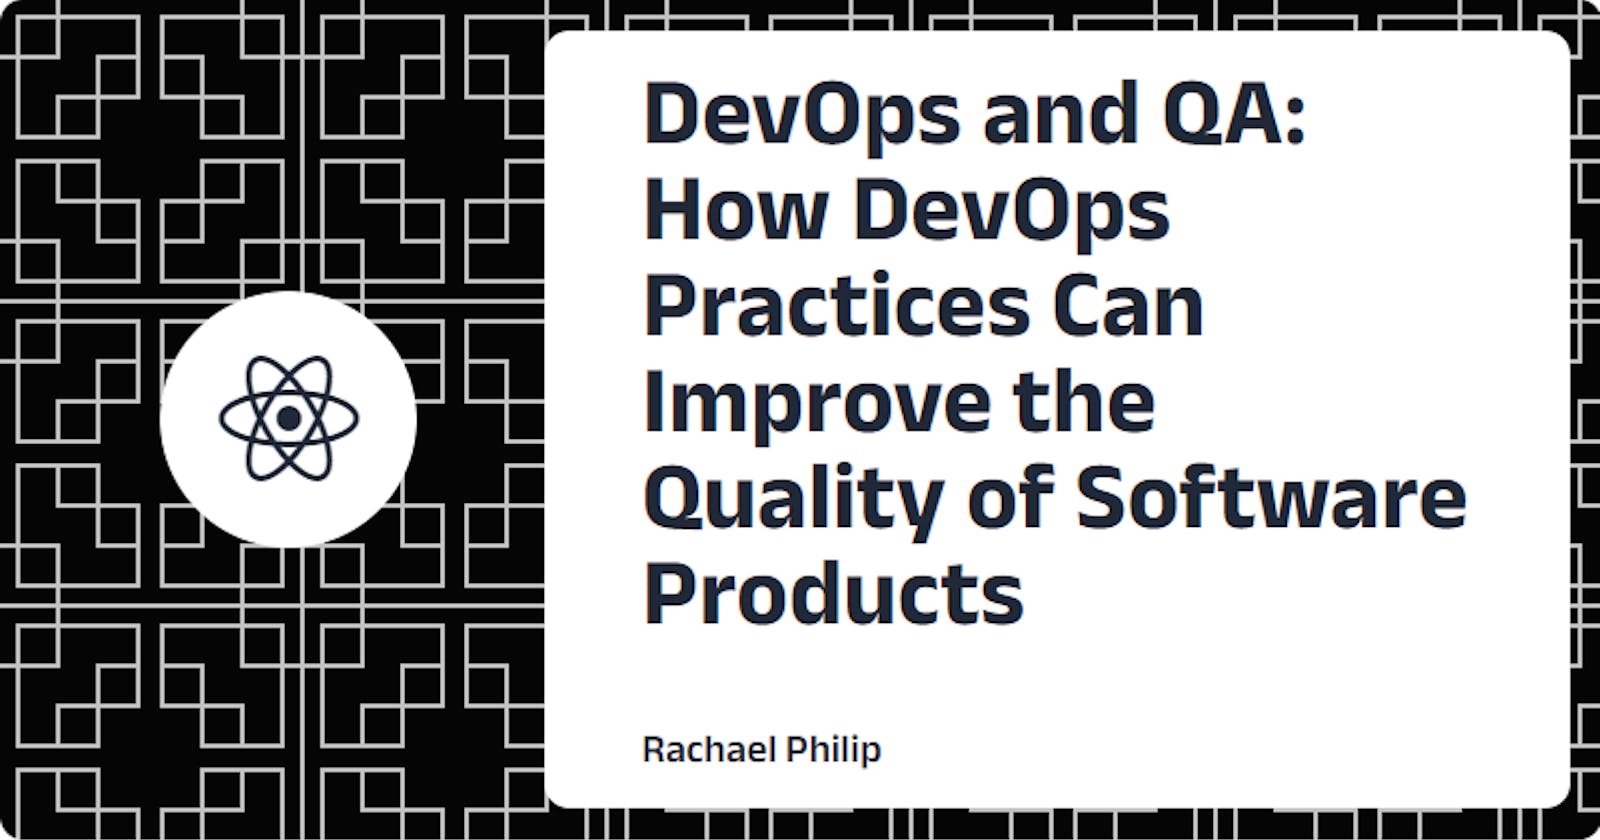 DevOps and QA: How DevOps Practices Can Improve the Quality of Software Products.